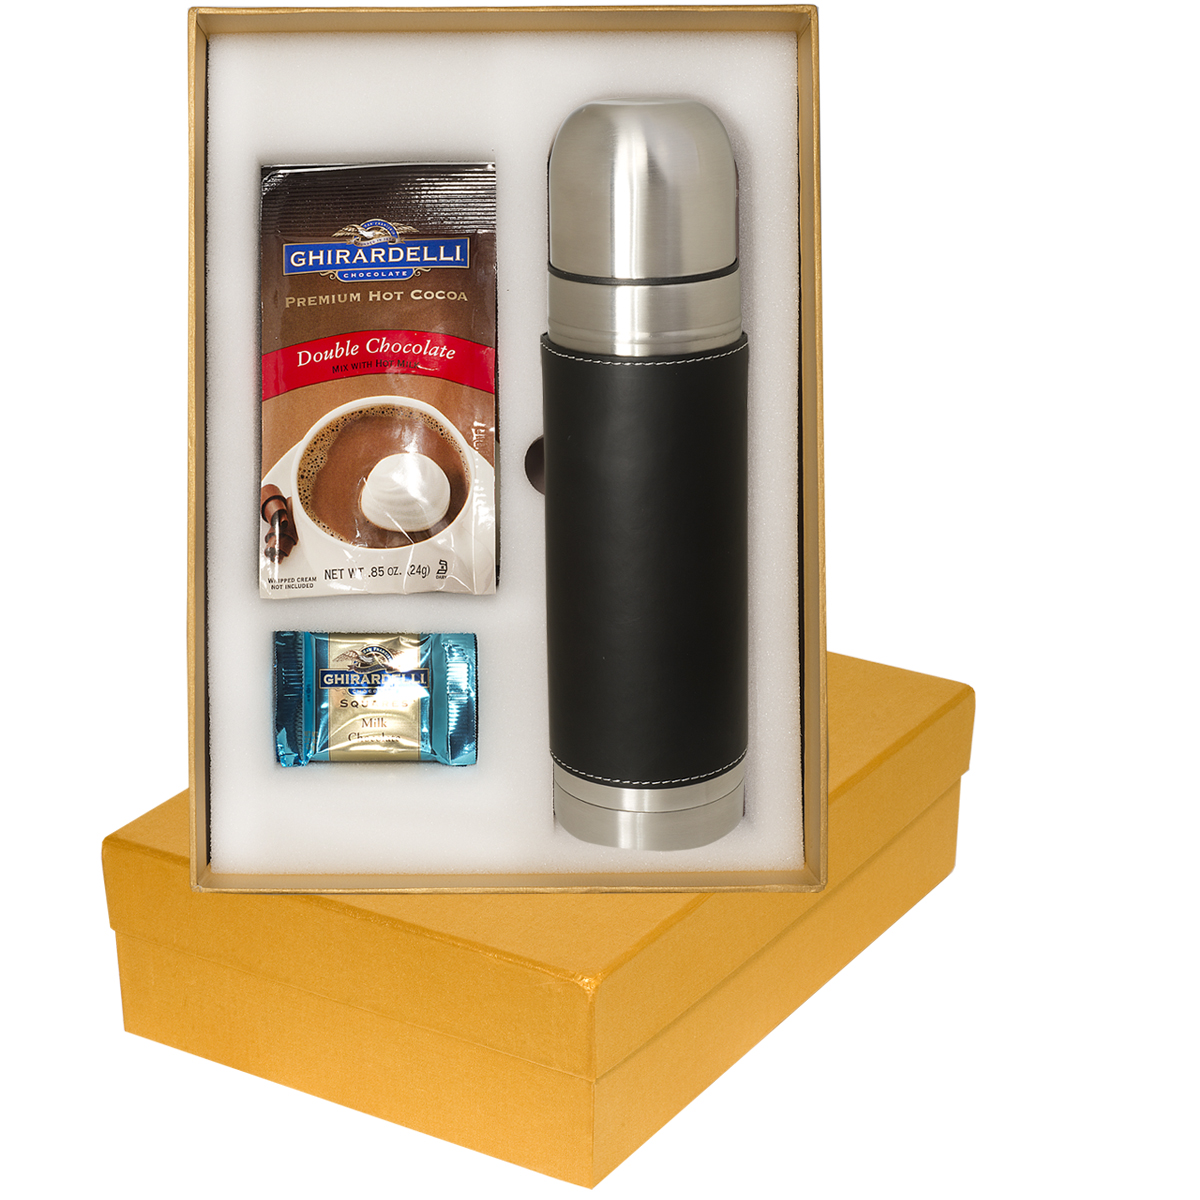 Tuscany™ Thermal Bottle & Ghirardelli® Deluxe Gift Set